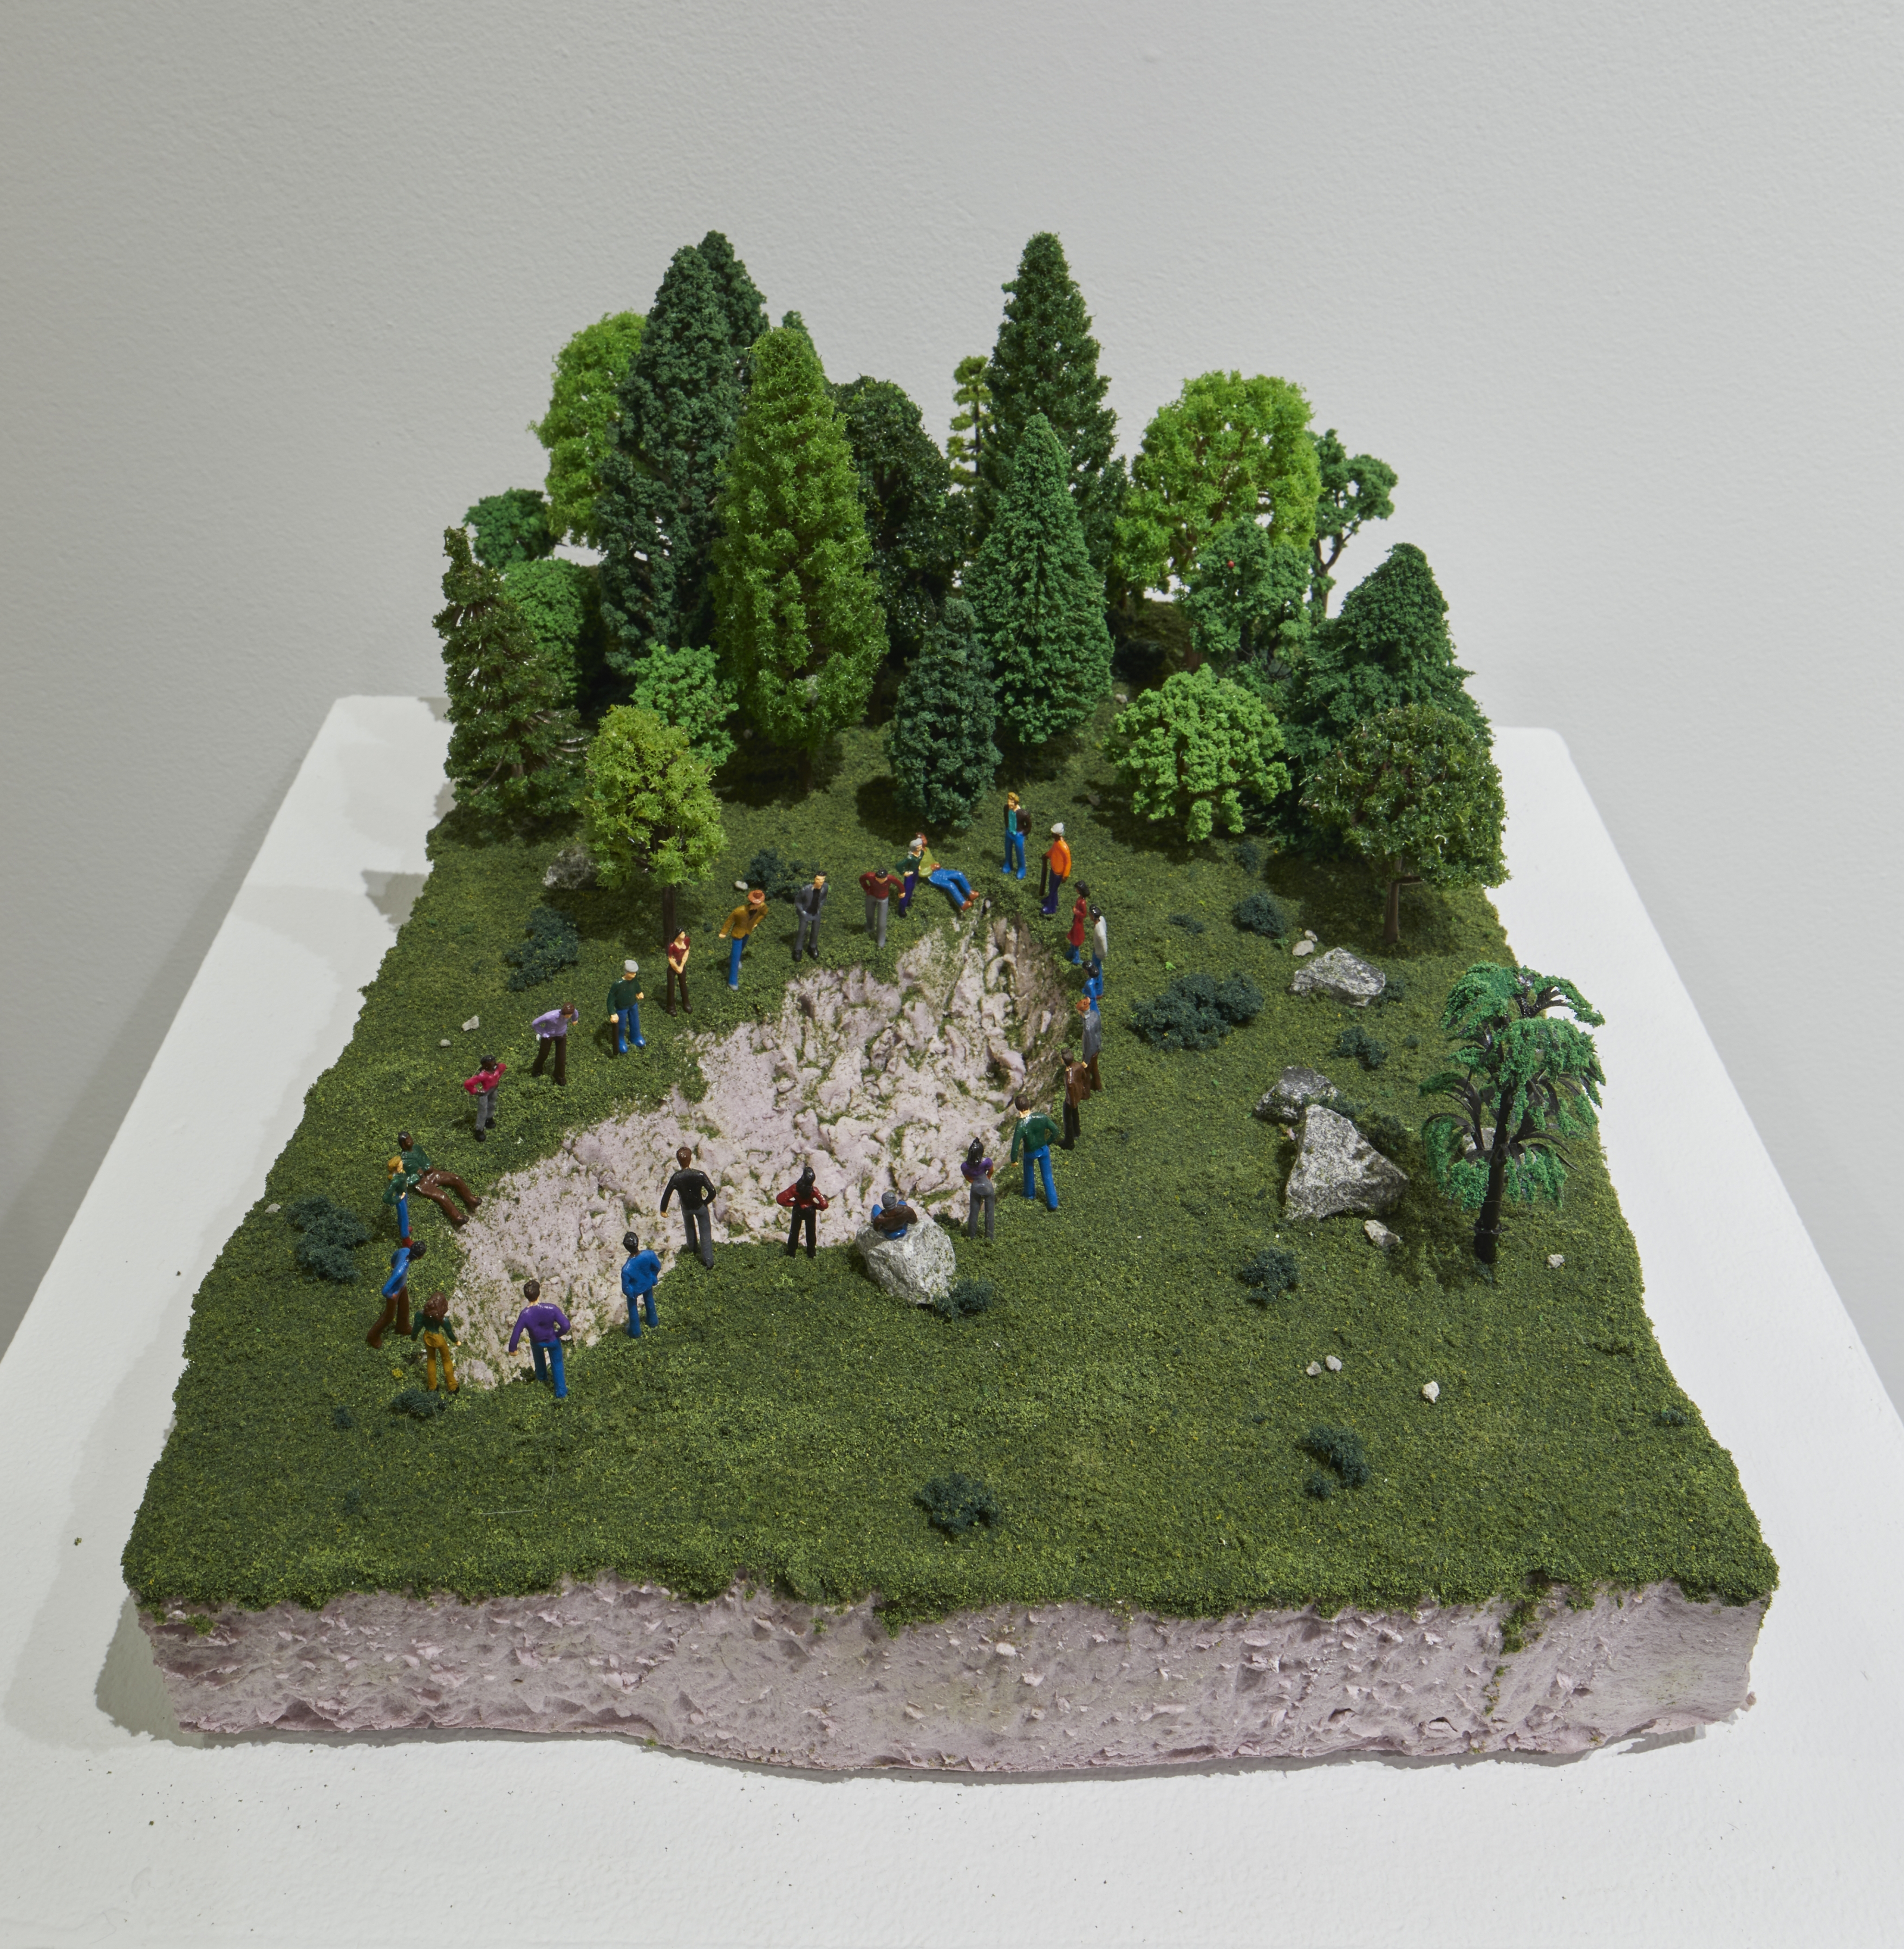 The Sink Hole, 2021
Carving foam and model train landscape material and figures
8 x 15 x 12 inches